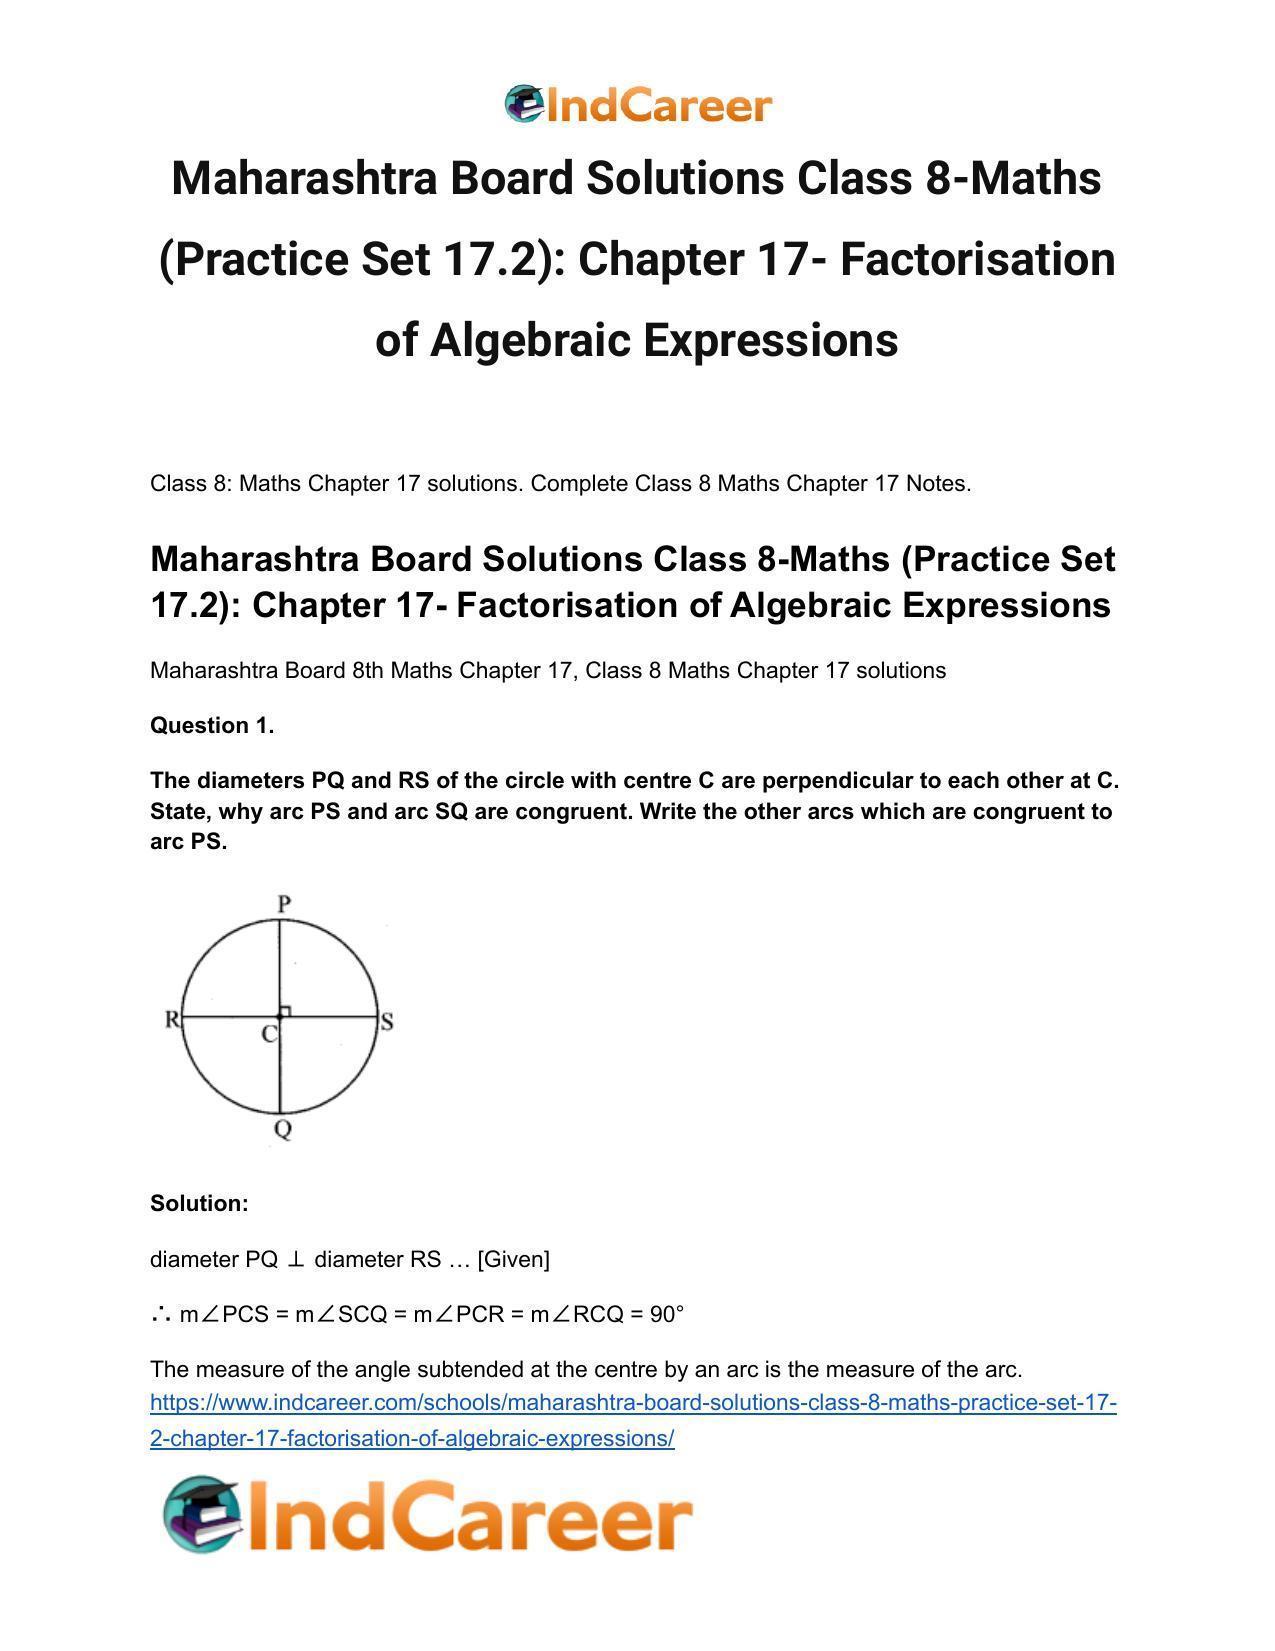 Maharashtra Board Solutions Class 8-Maths (Practice Set 17.2): Chapter 17- Factorisation of Algebraic Expressions - Page 2